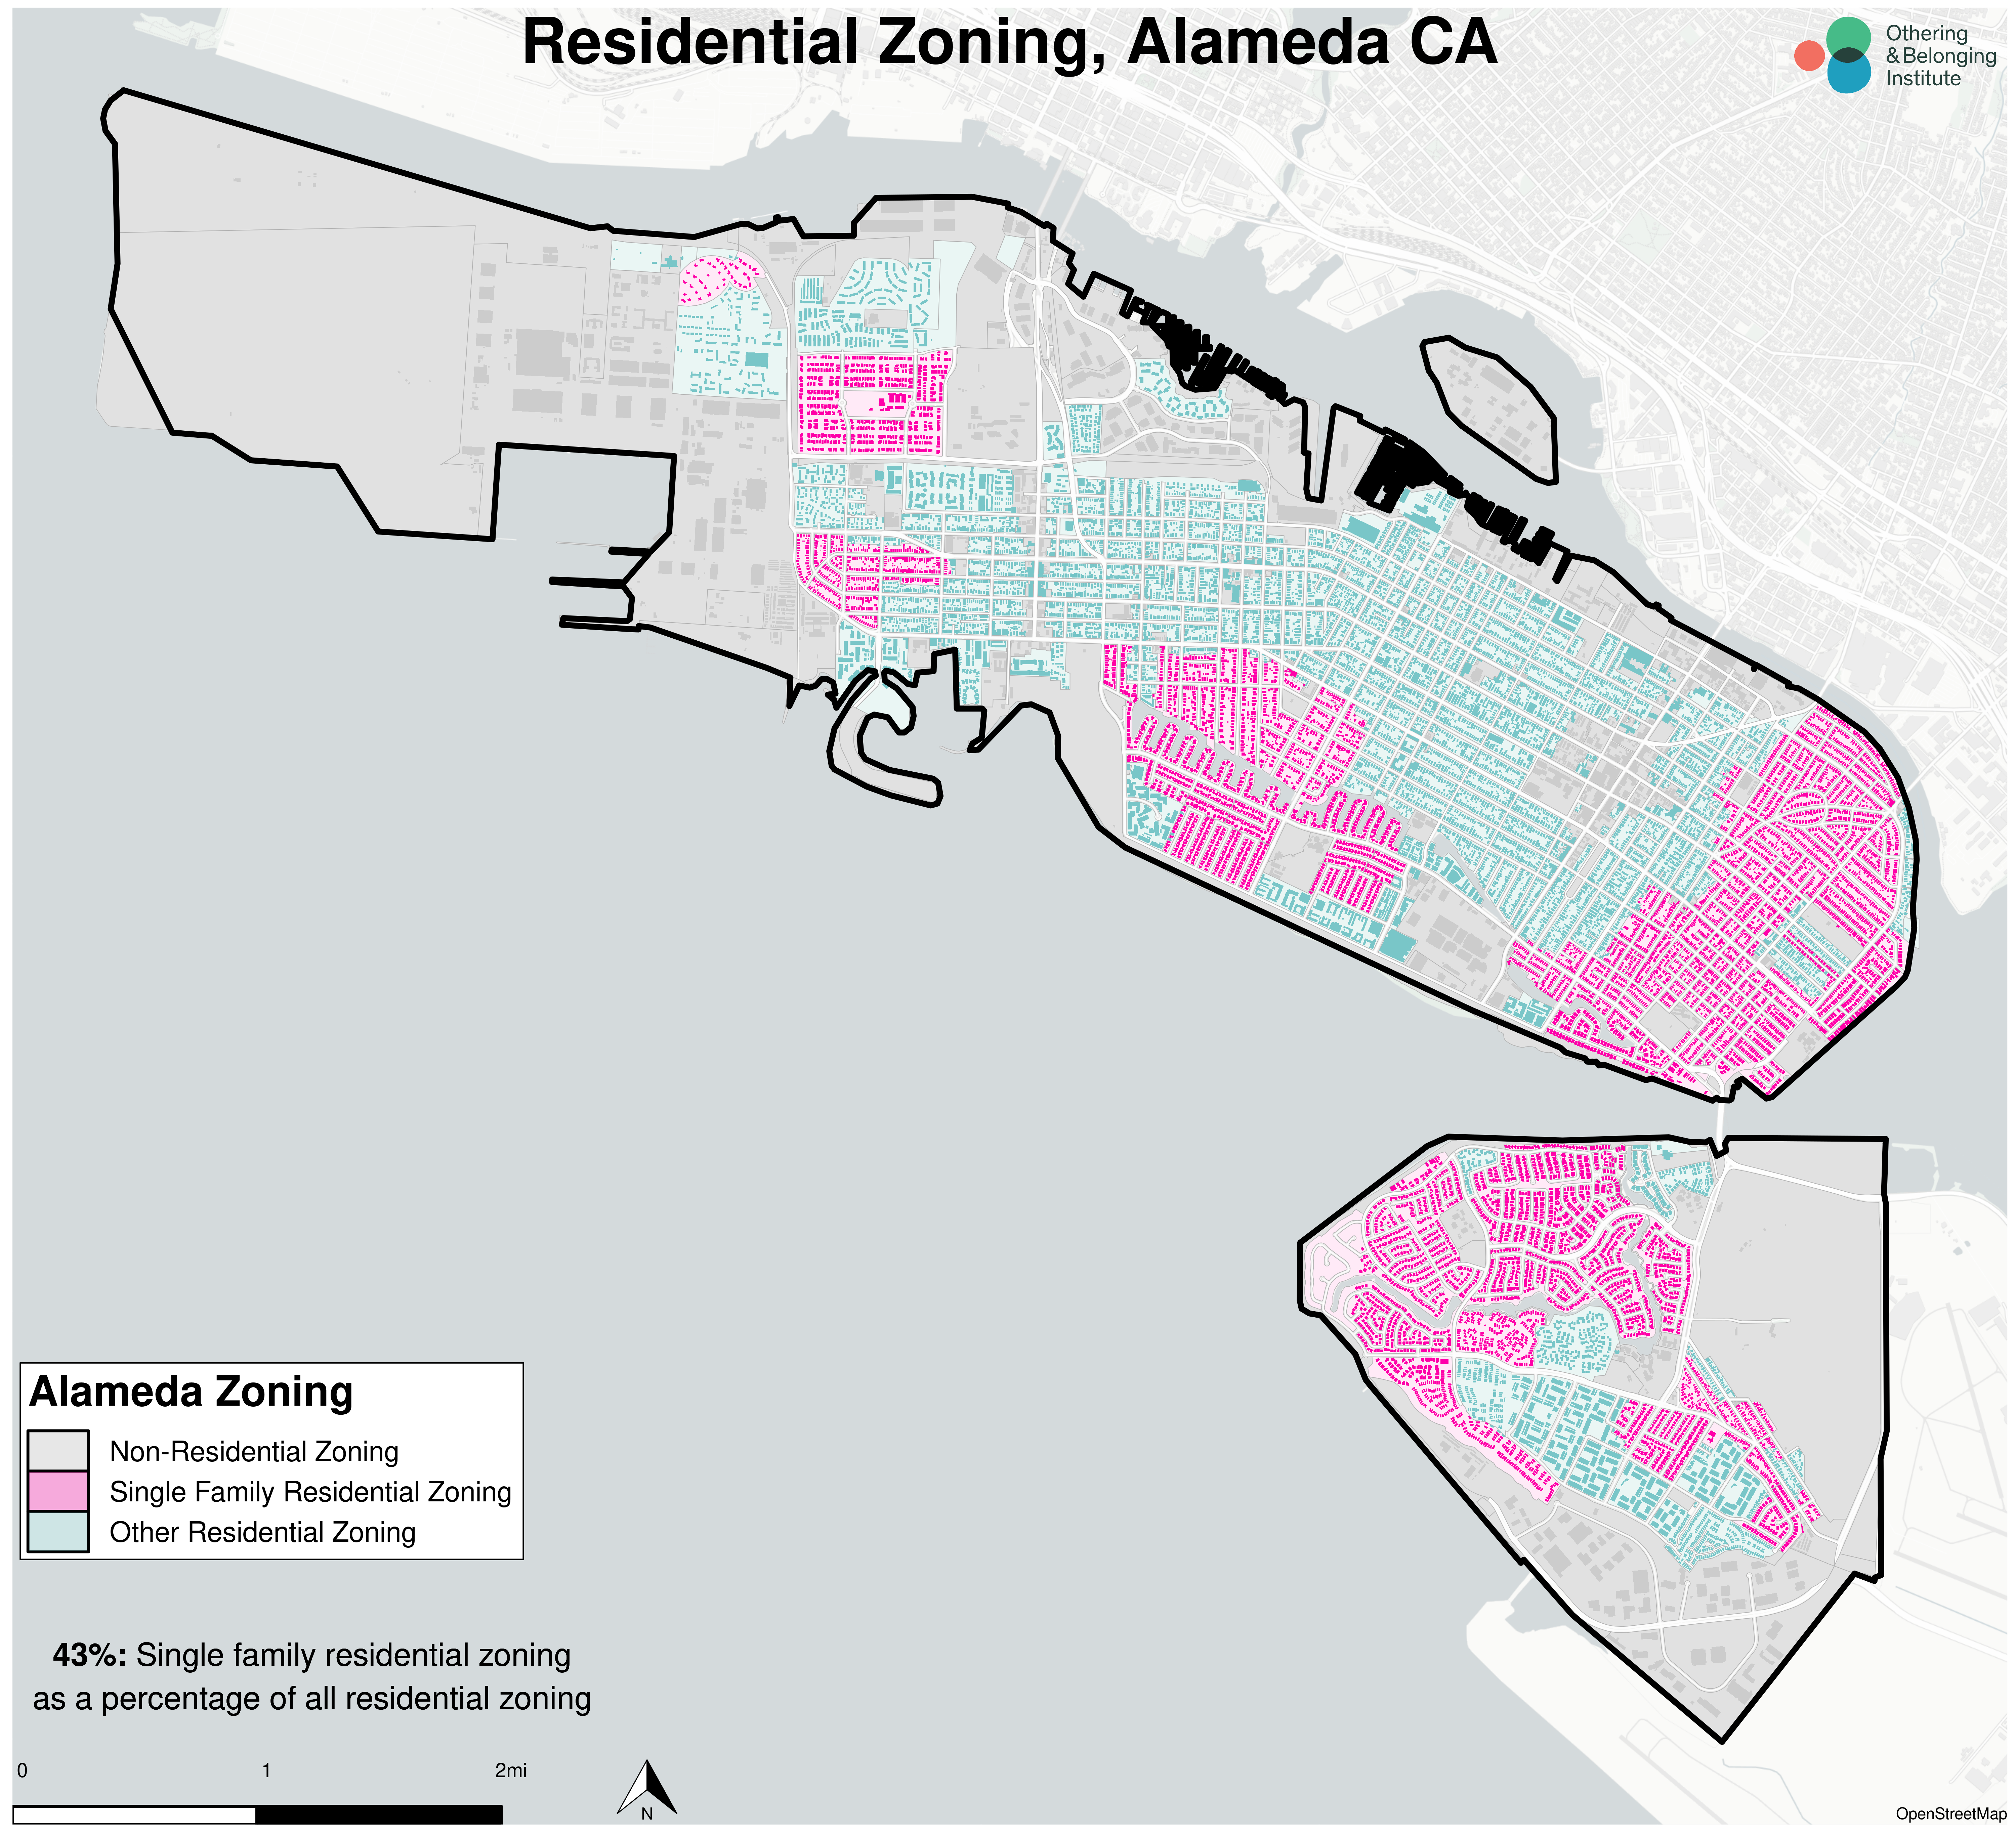 Bay Area Zoning Maps | Othering 